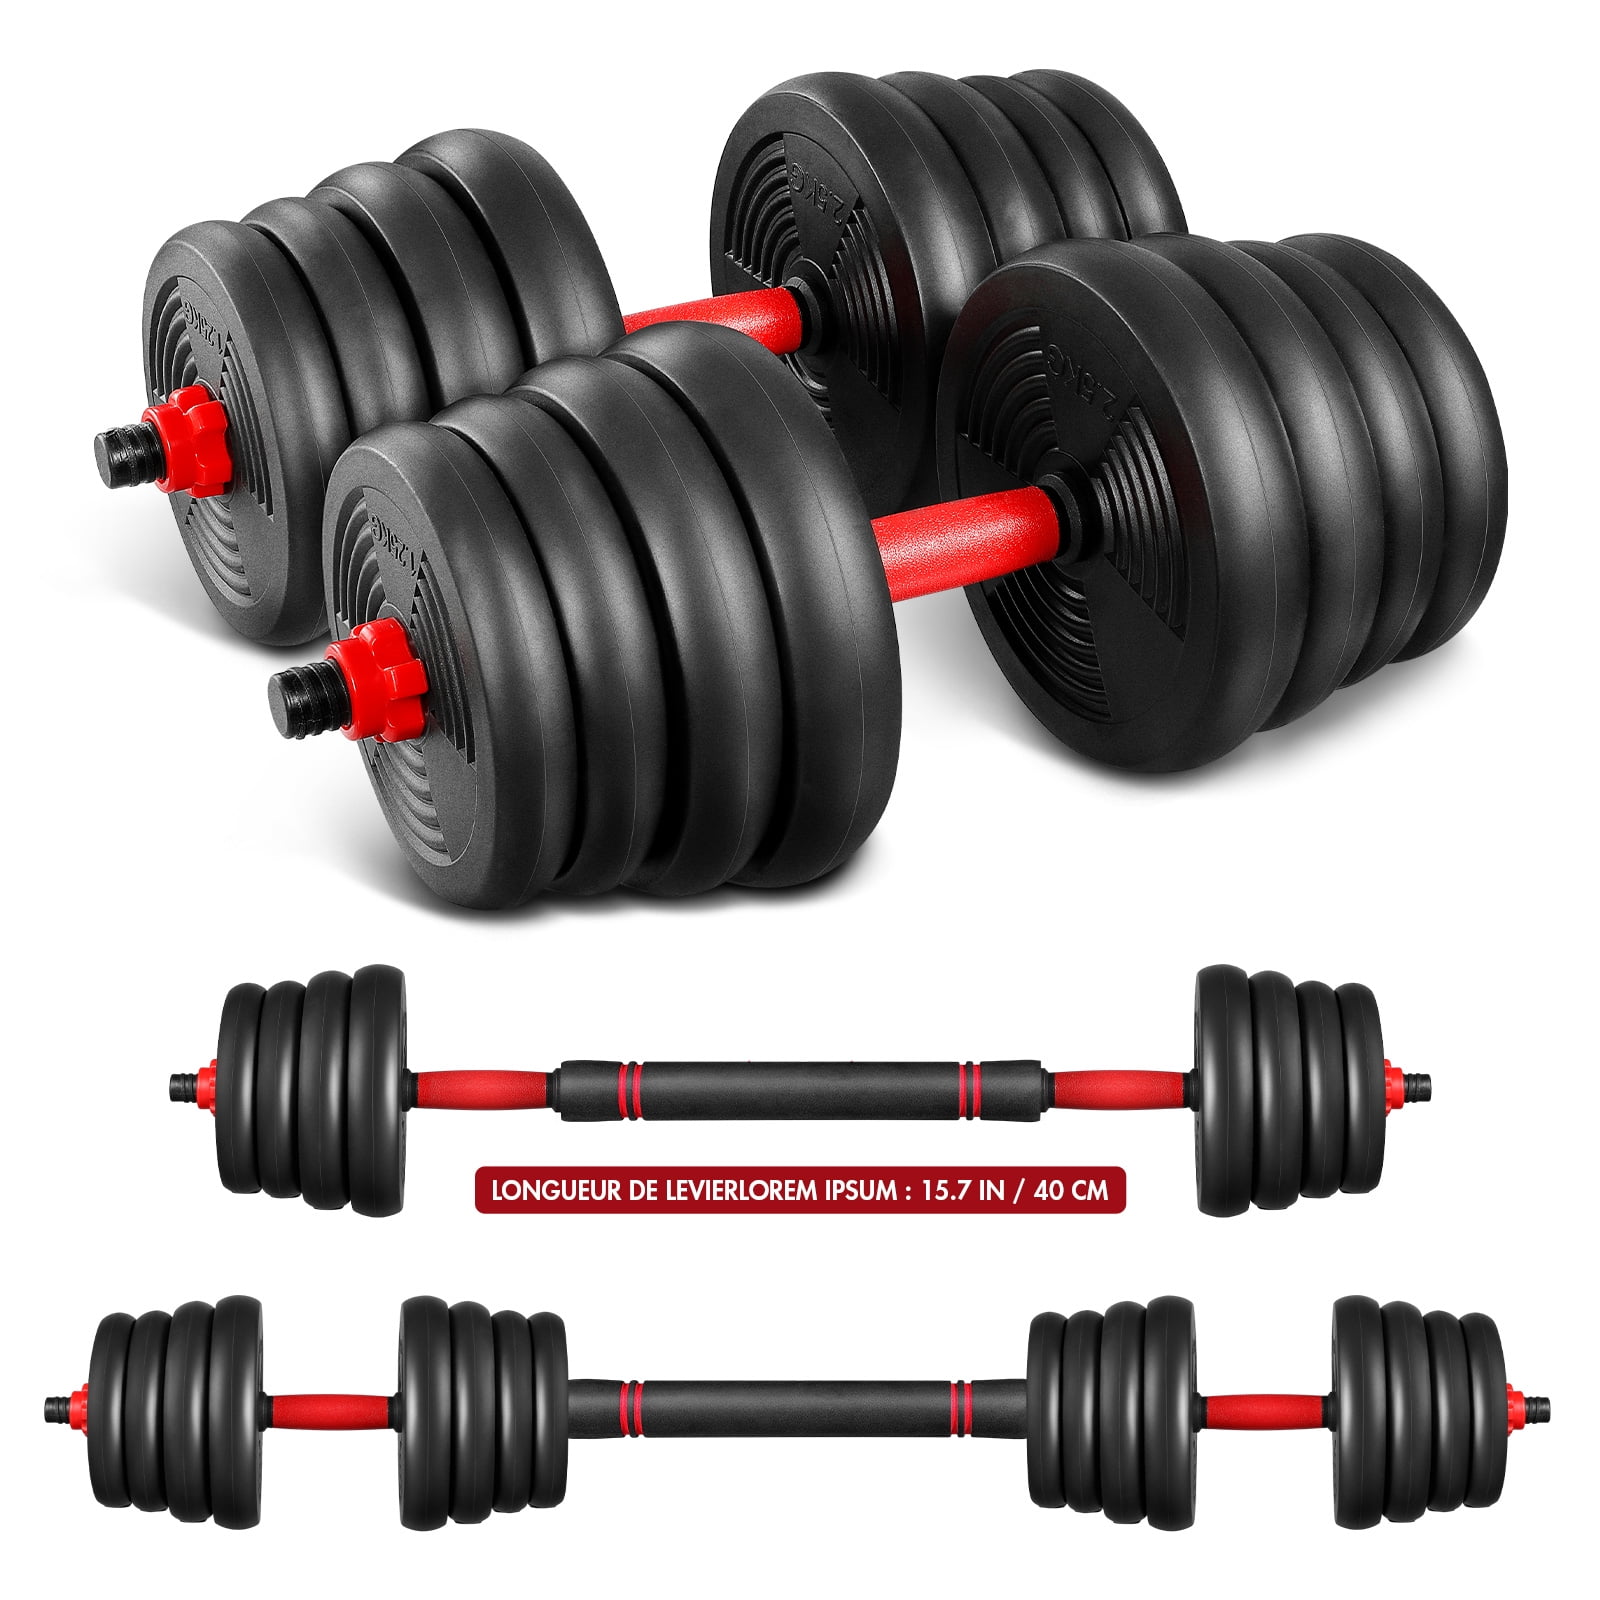 GEEMAX Adjustable Dumbbell Set Weight Barbell Plates GYM Home Workout 44/66LBS 